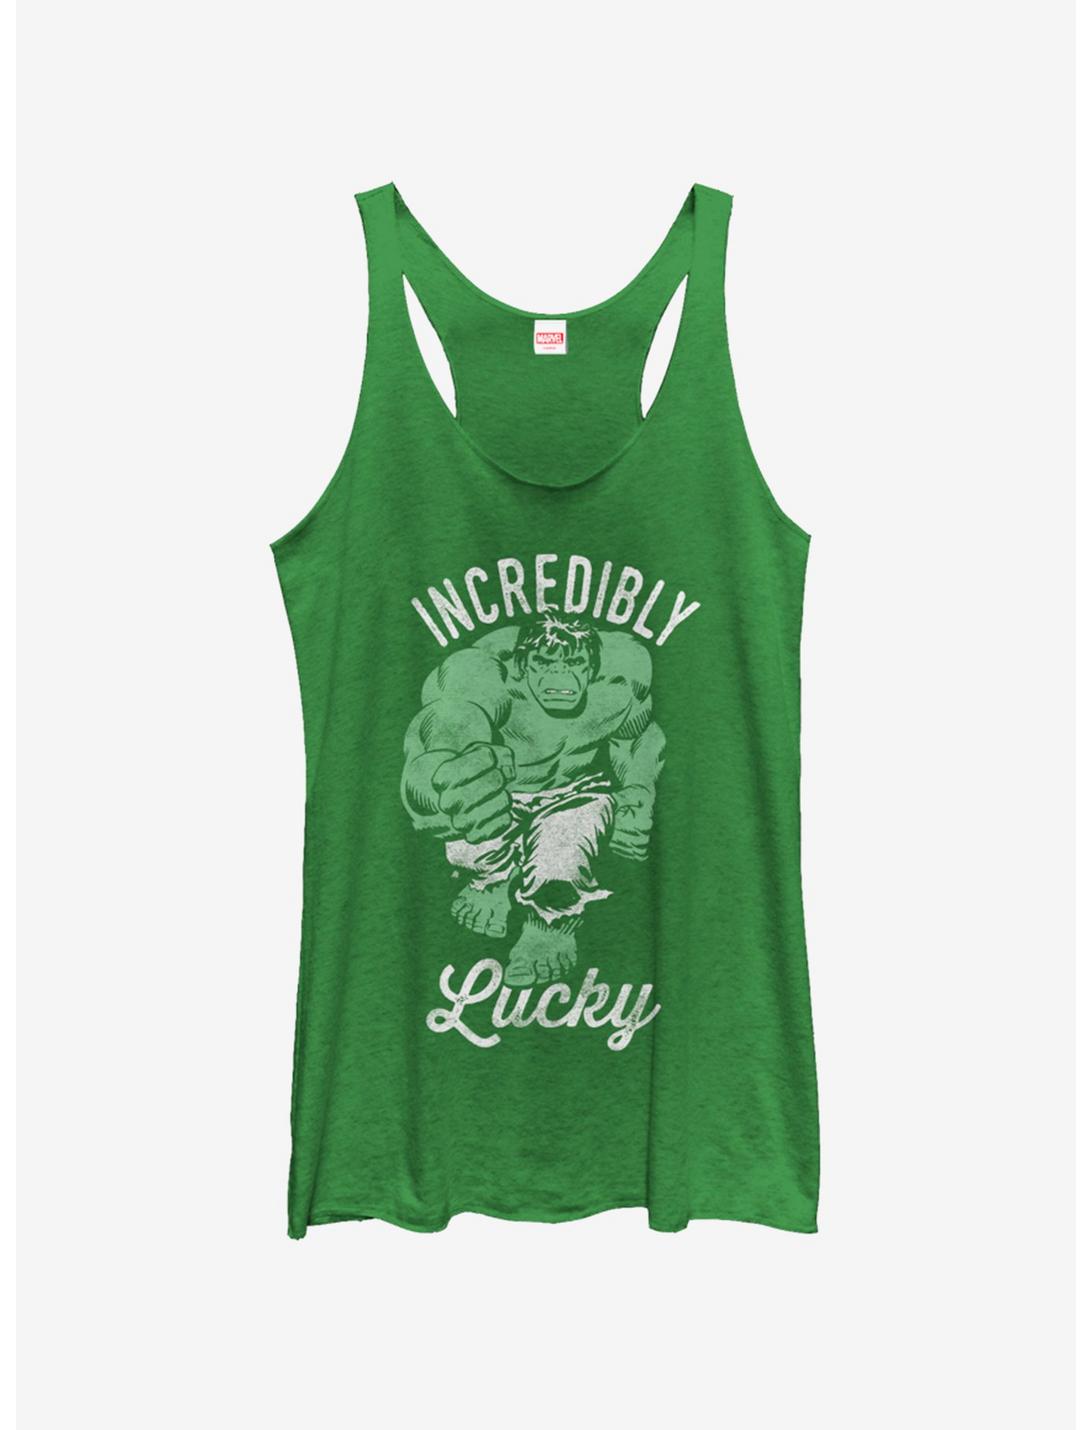 Marvel Incredibly Lucky Womens Tank Top, ENVY, hi-res